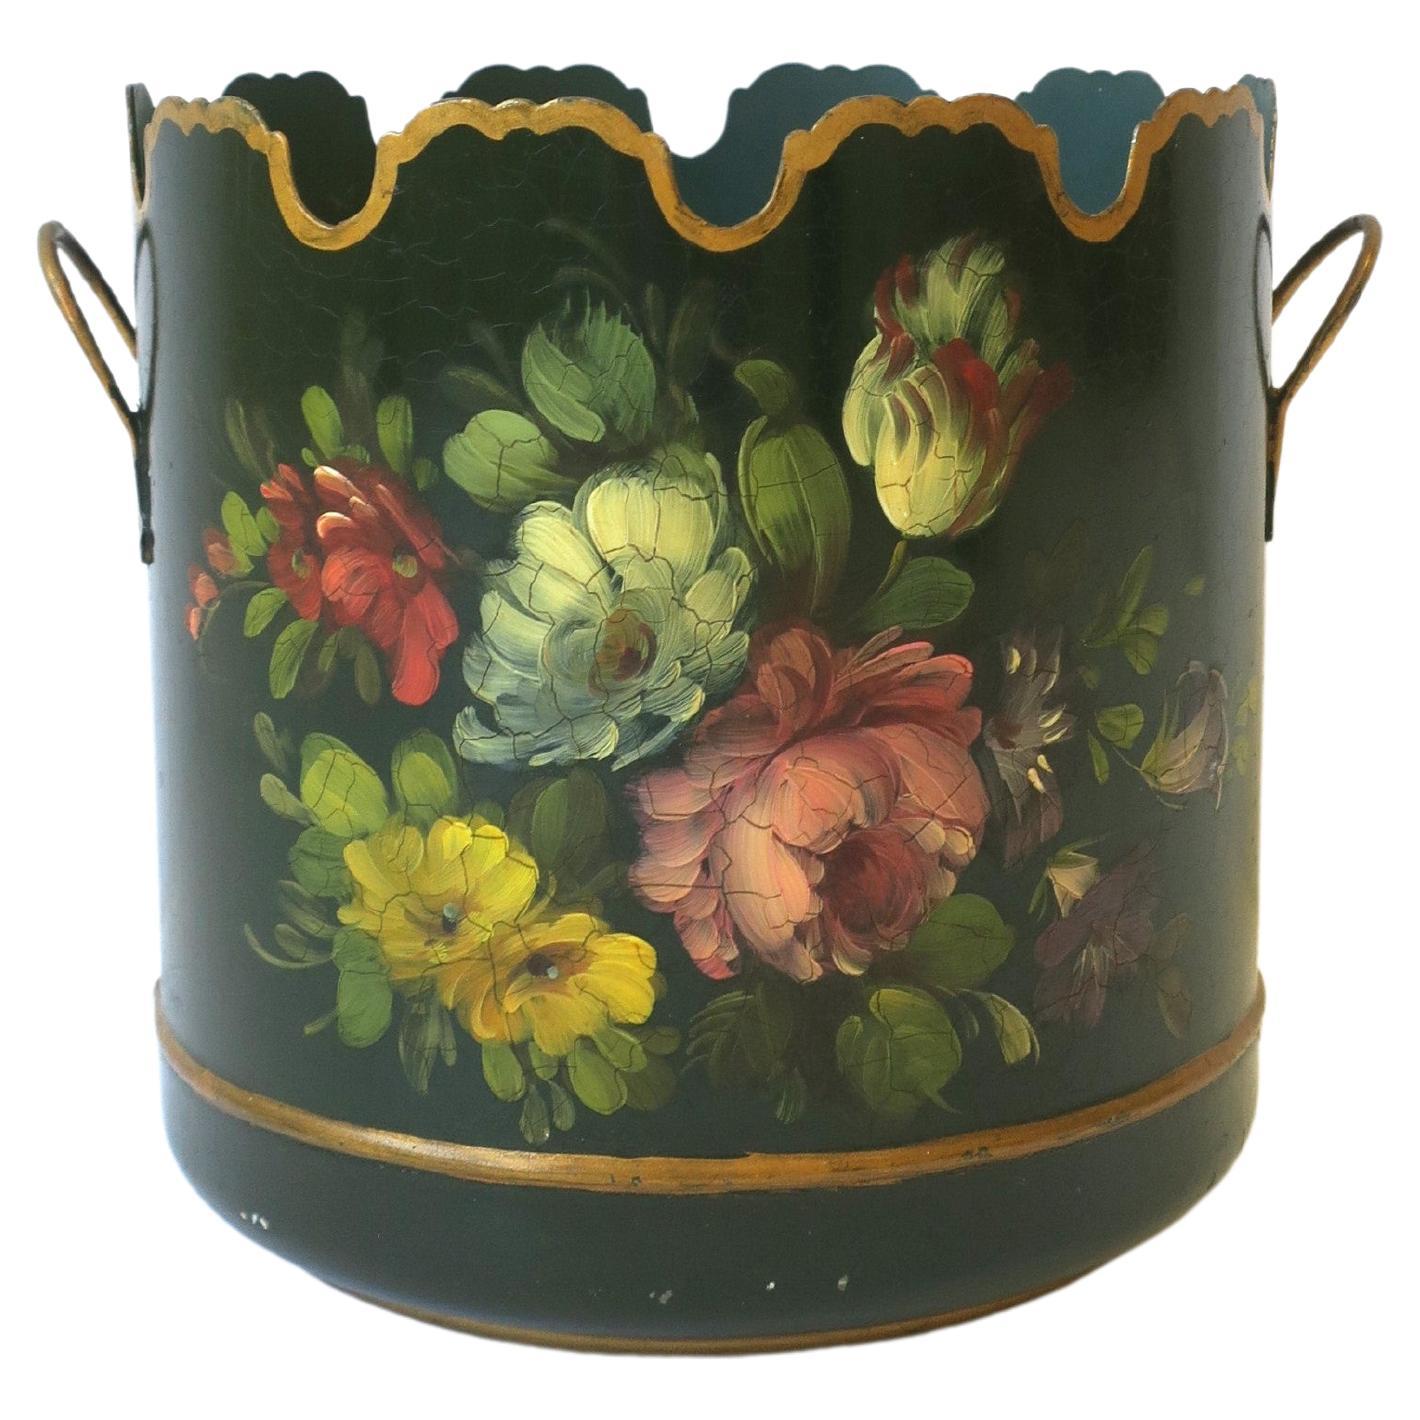 French Tôle Green & Gold Jardinière Cachepot with Scalloped Edge, 20th c France For Sale